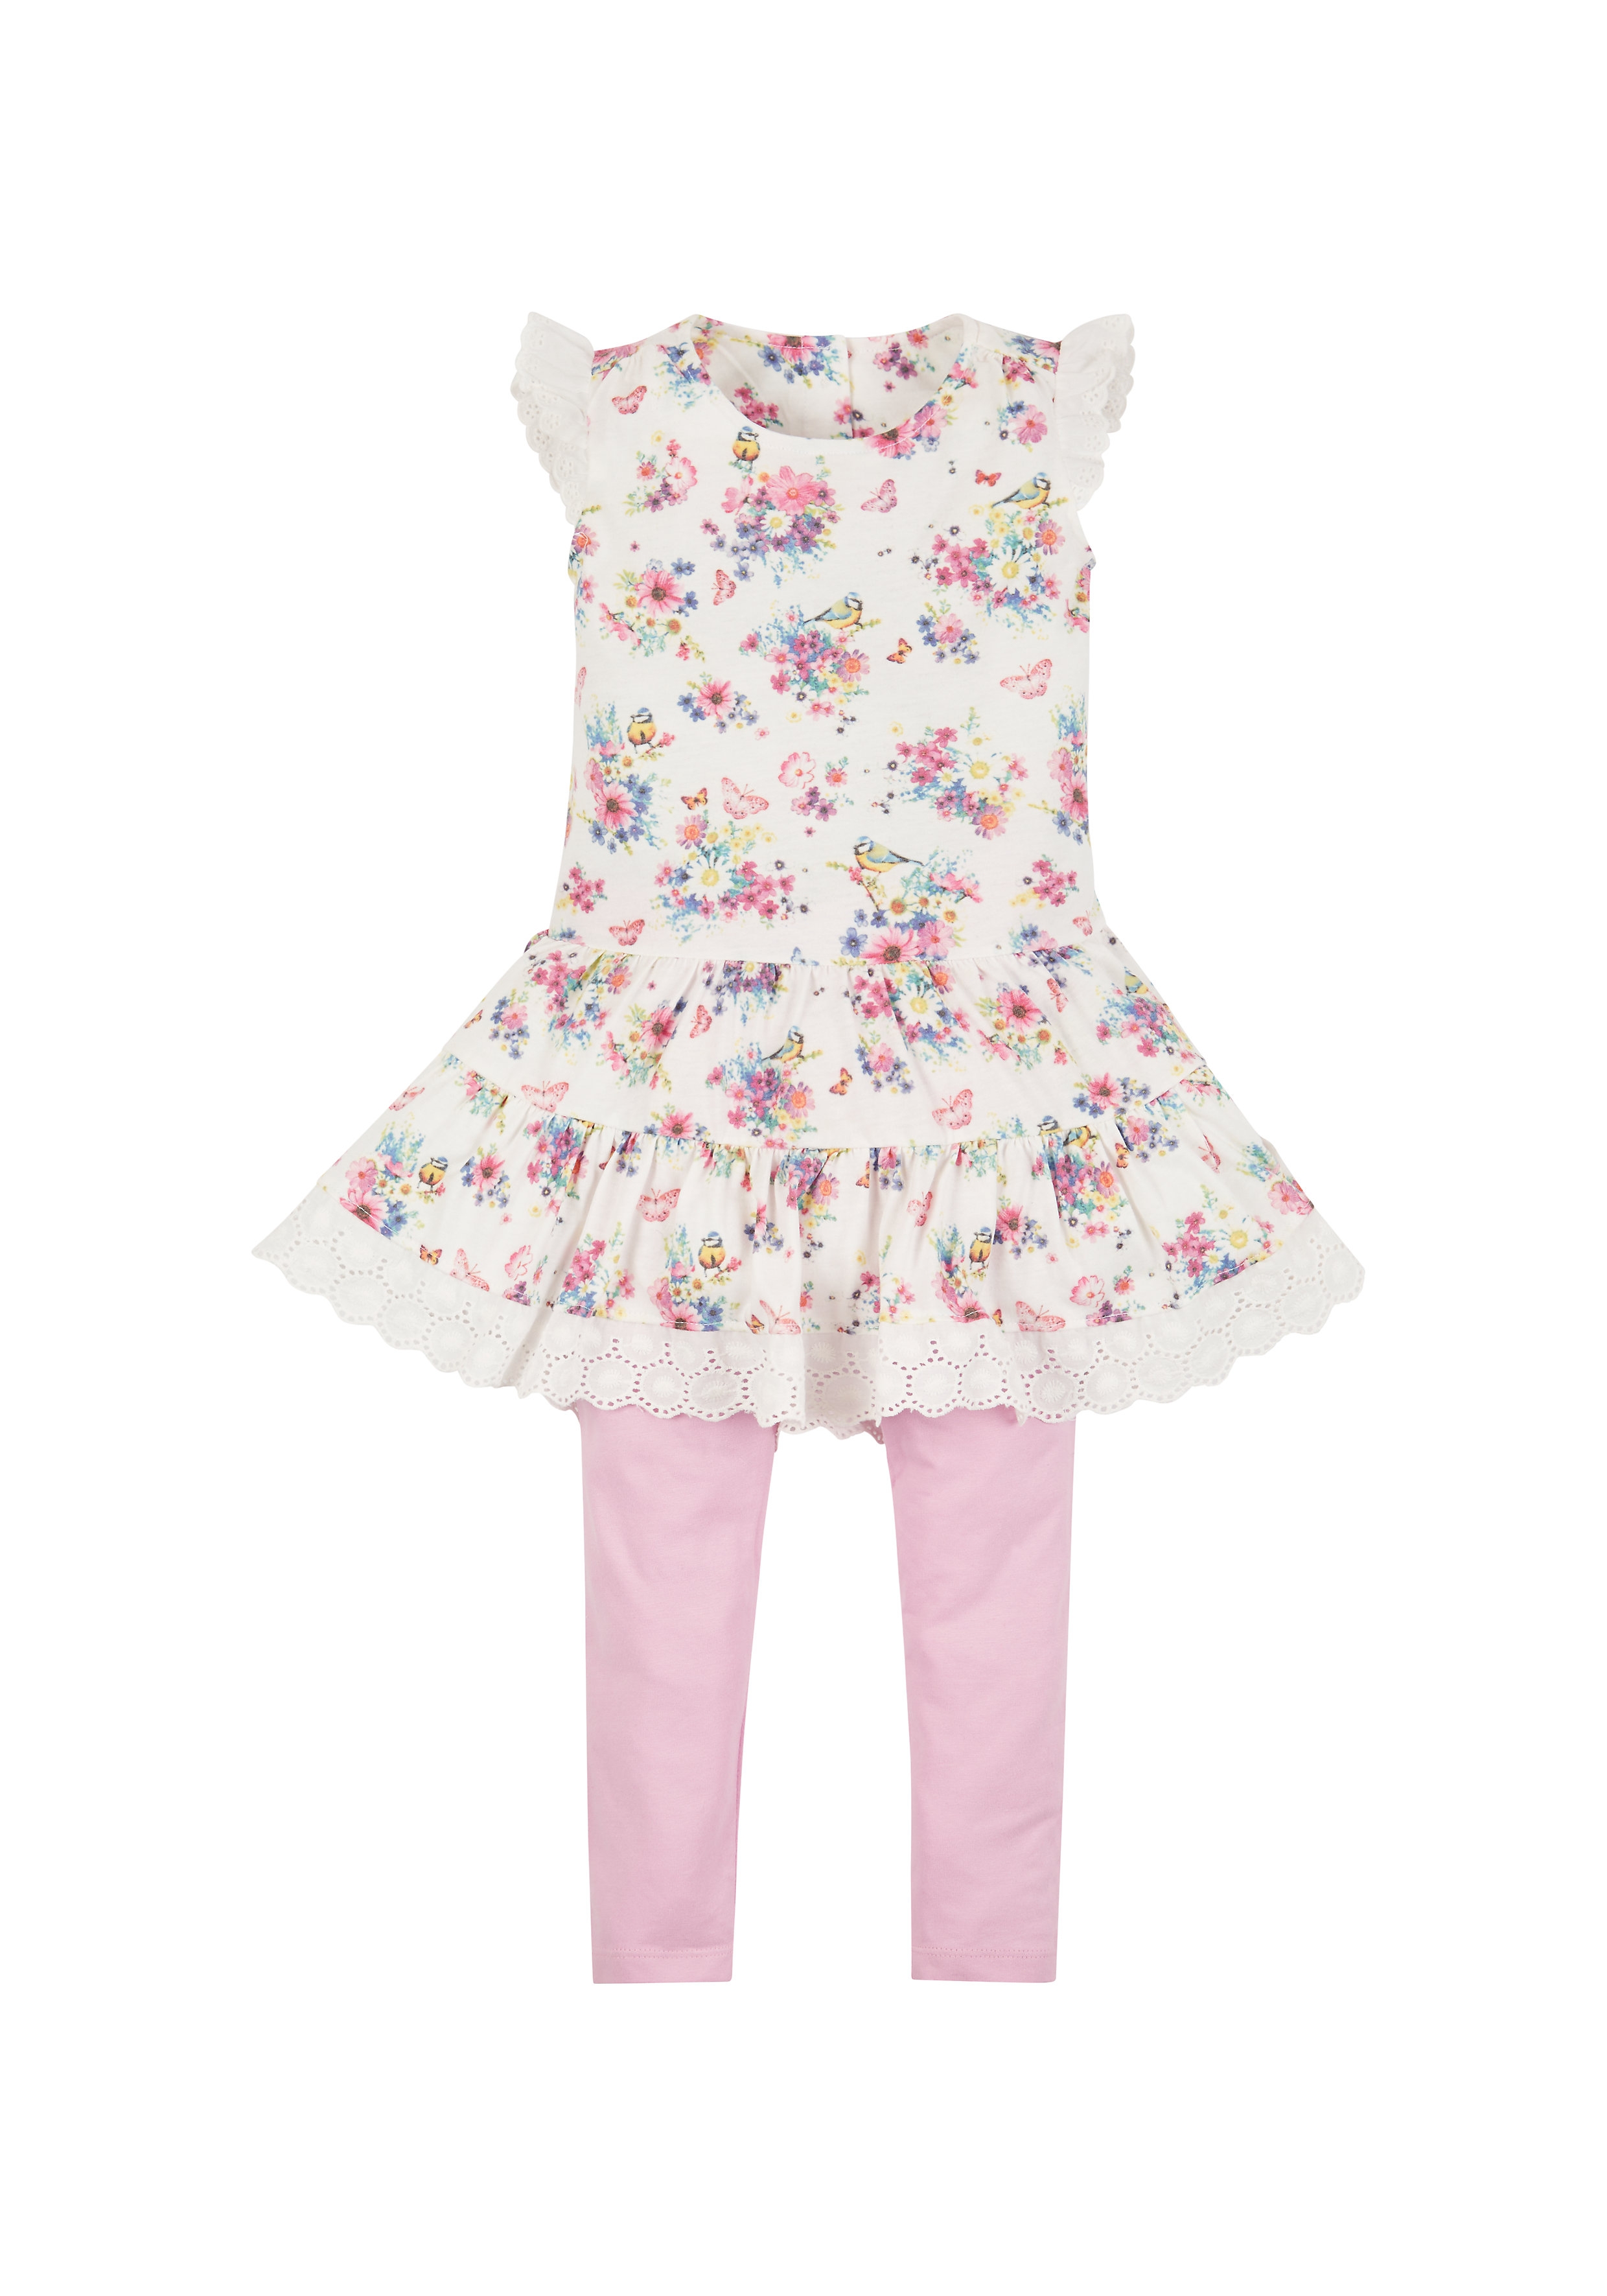 Mothercare | Girls Floral Dress And Leggings Set 0